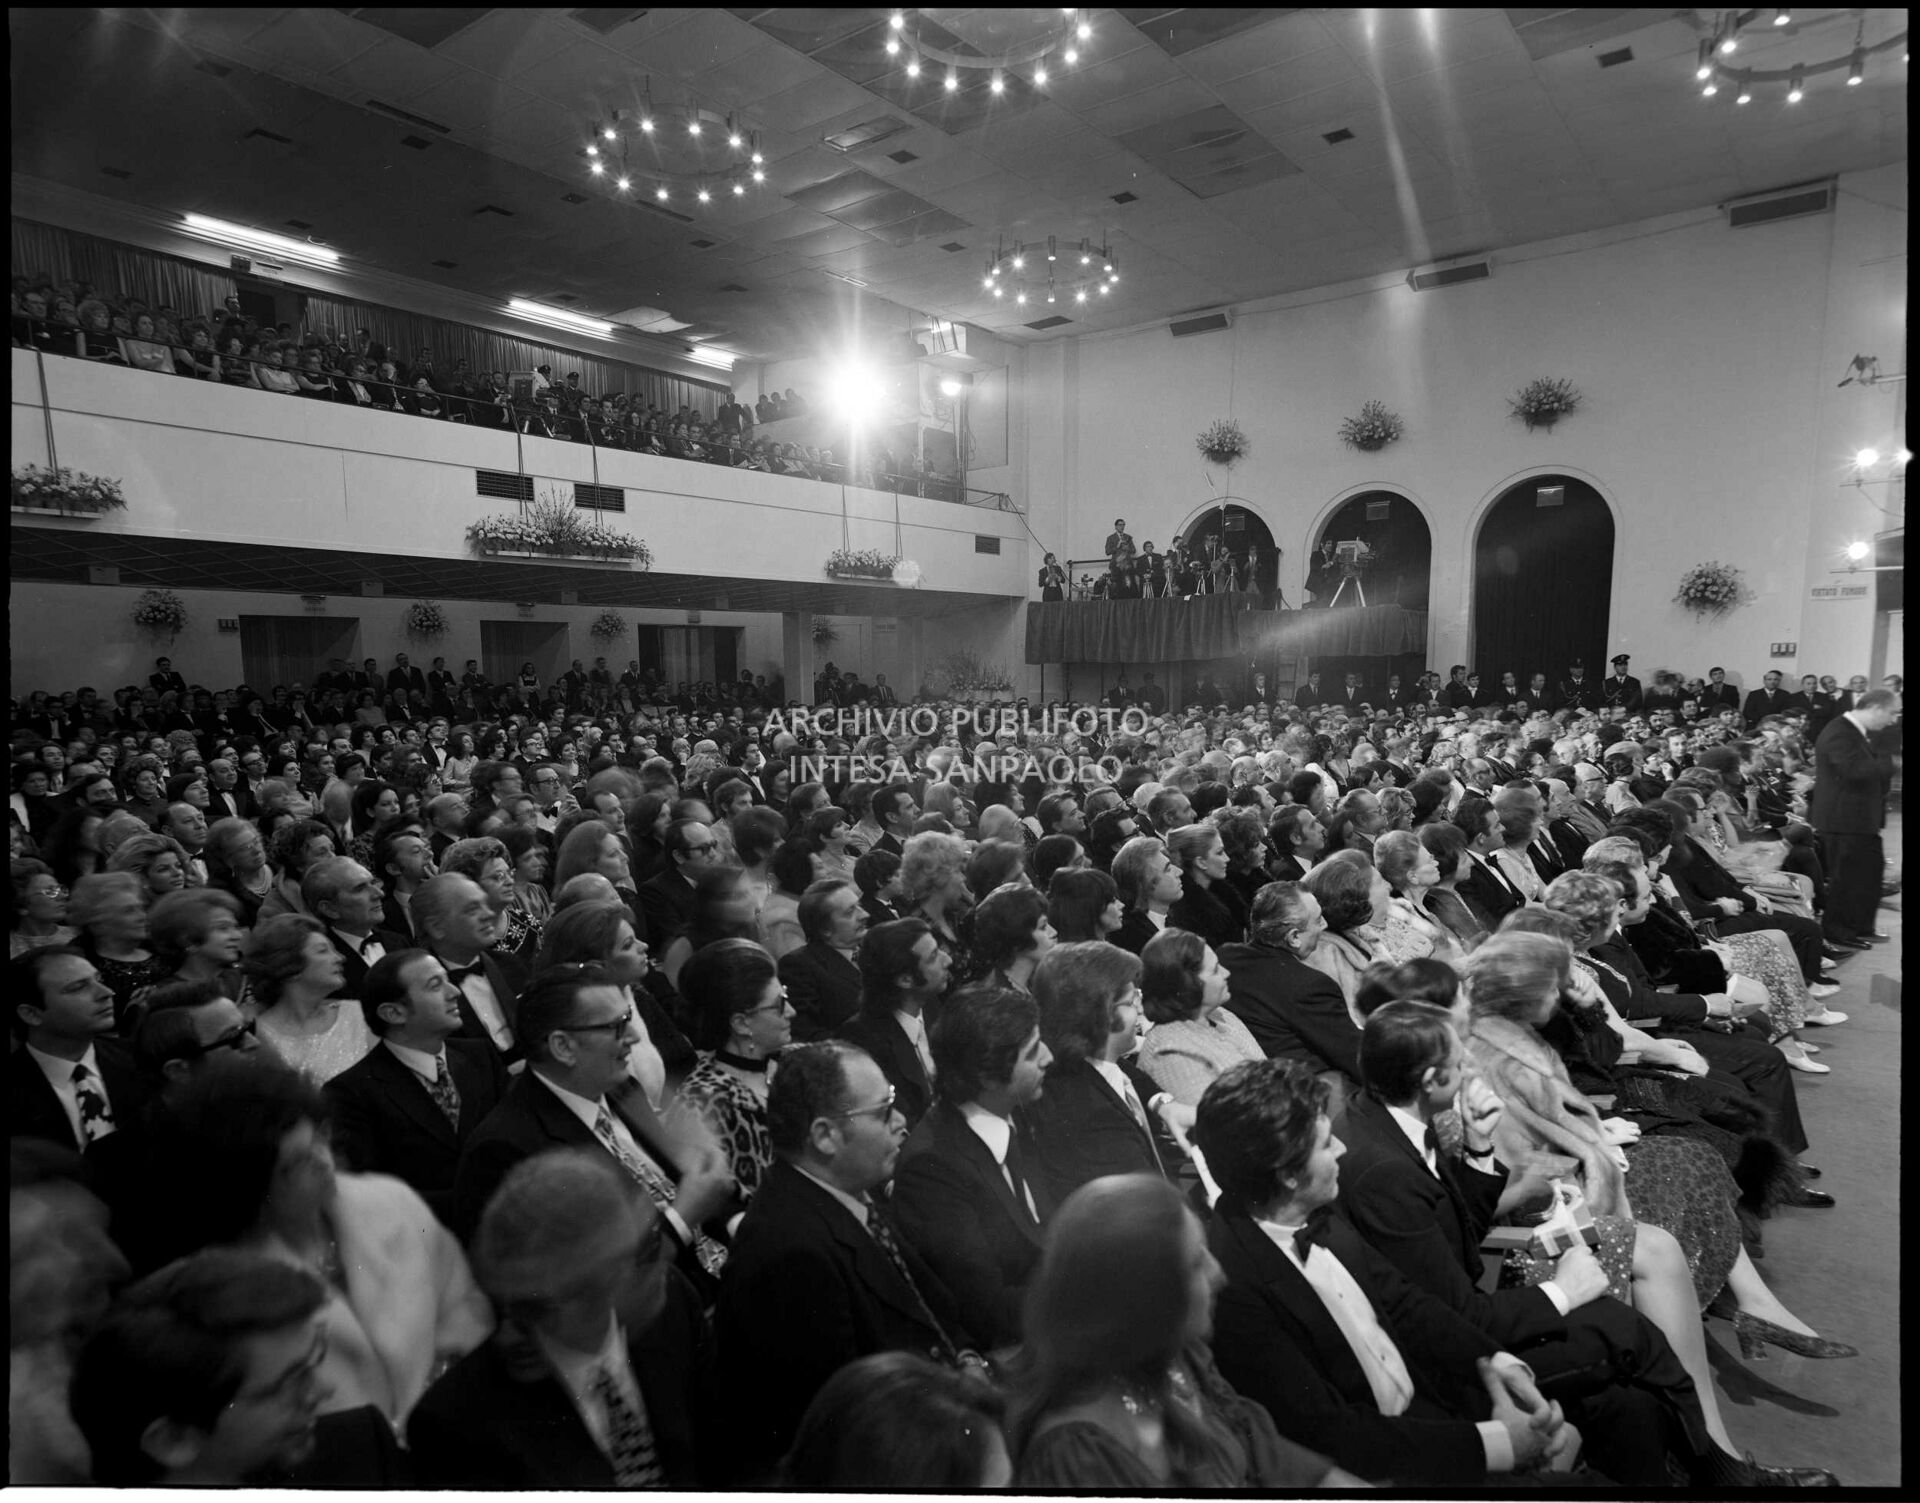 Audience in the stalls and gallery at the 21st Sanremo Festival; the photographers' platform in the background